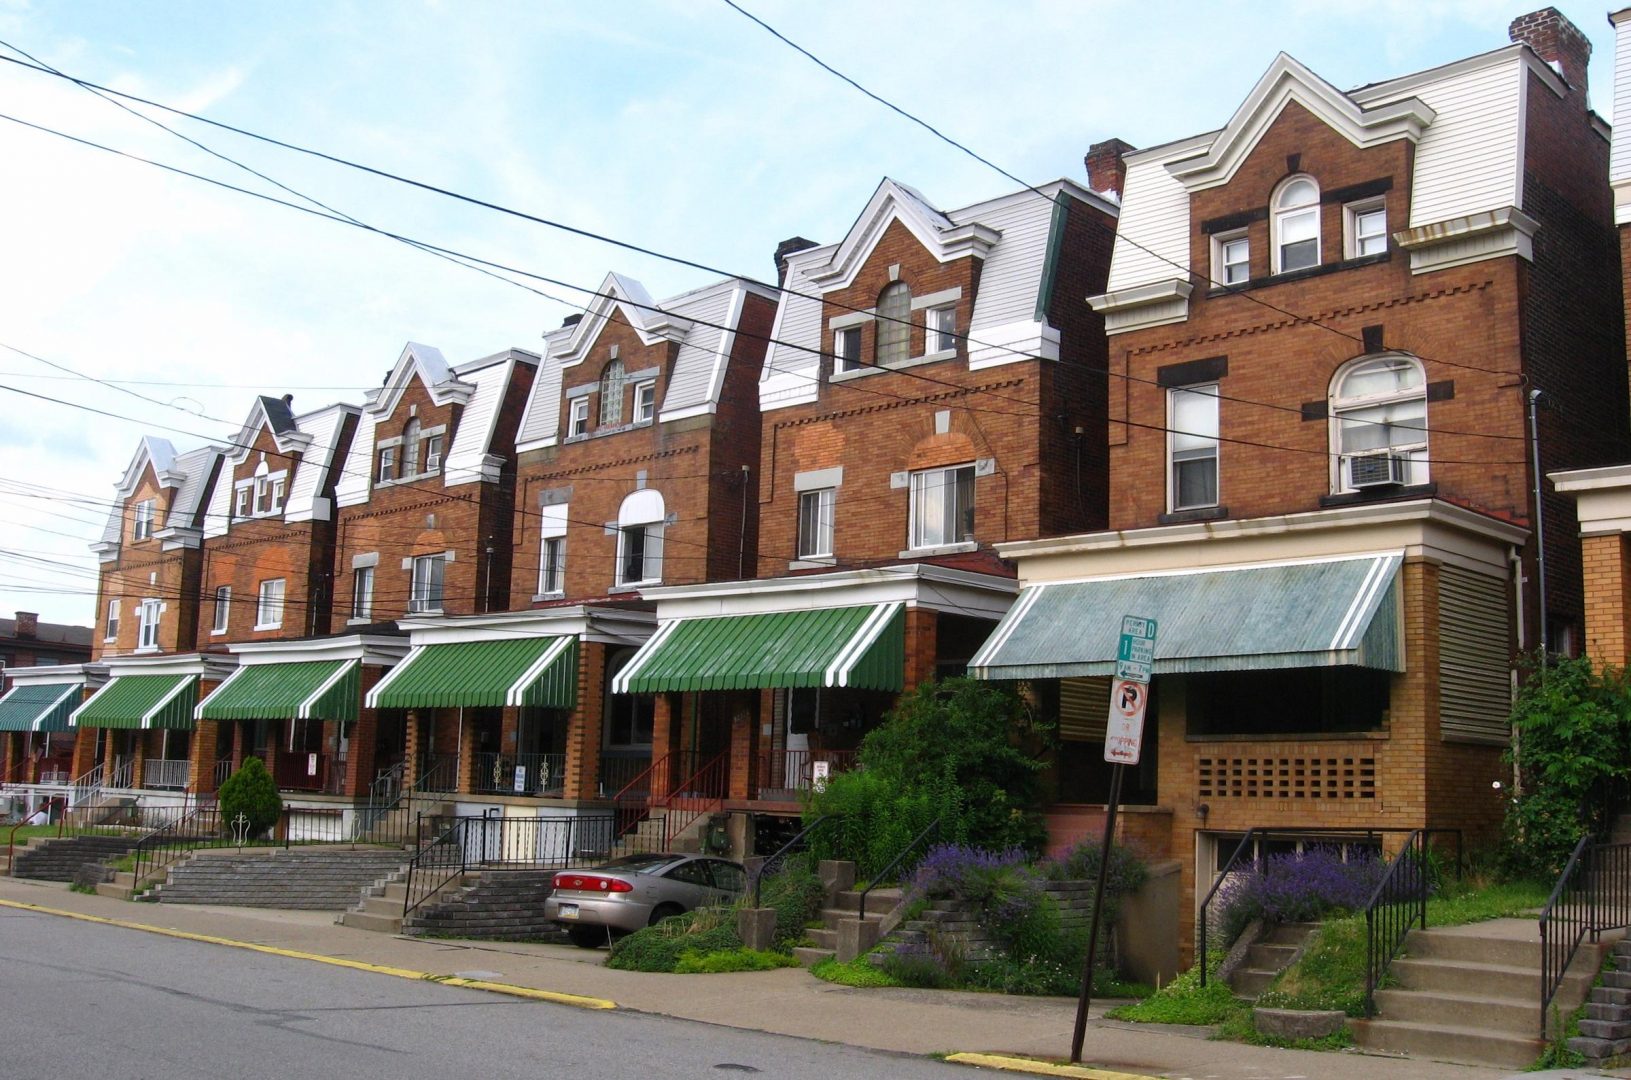 Apartment buildings in South Oakland, Pittsburgh.